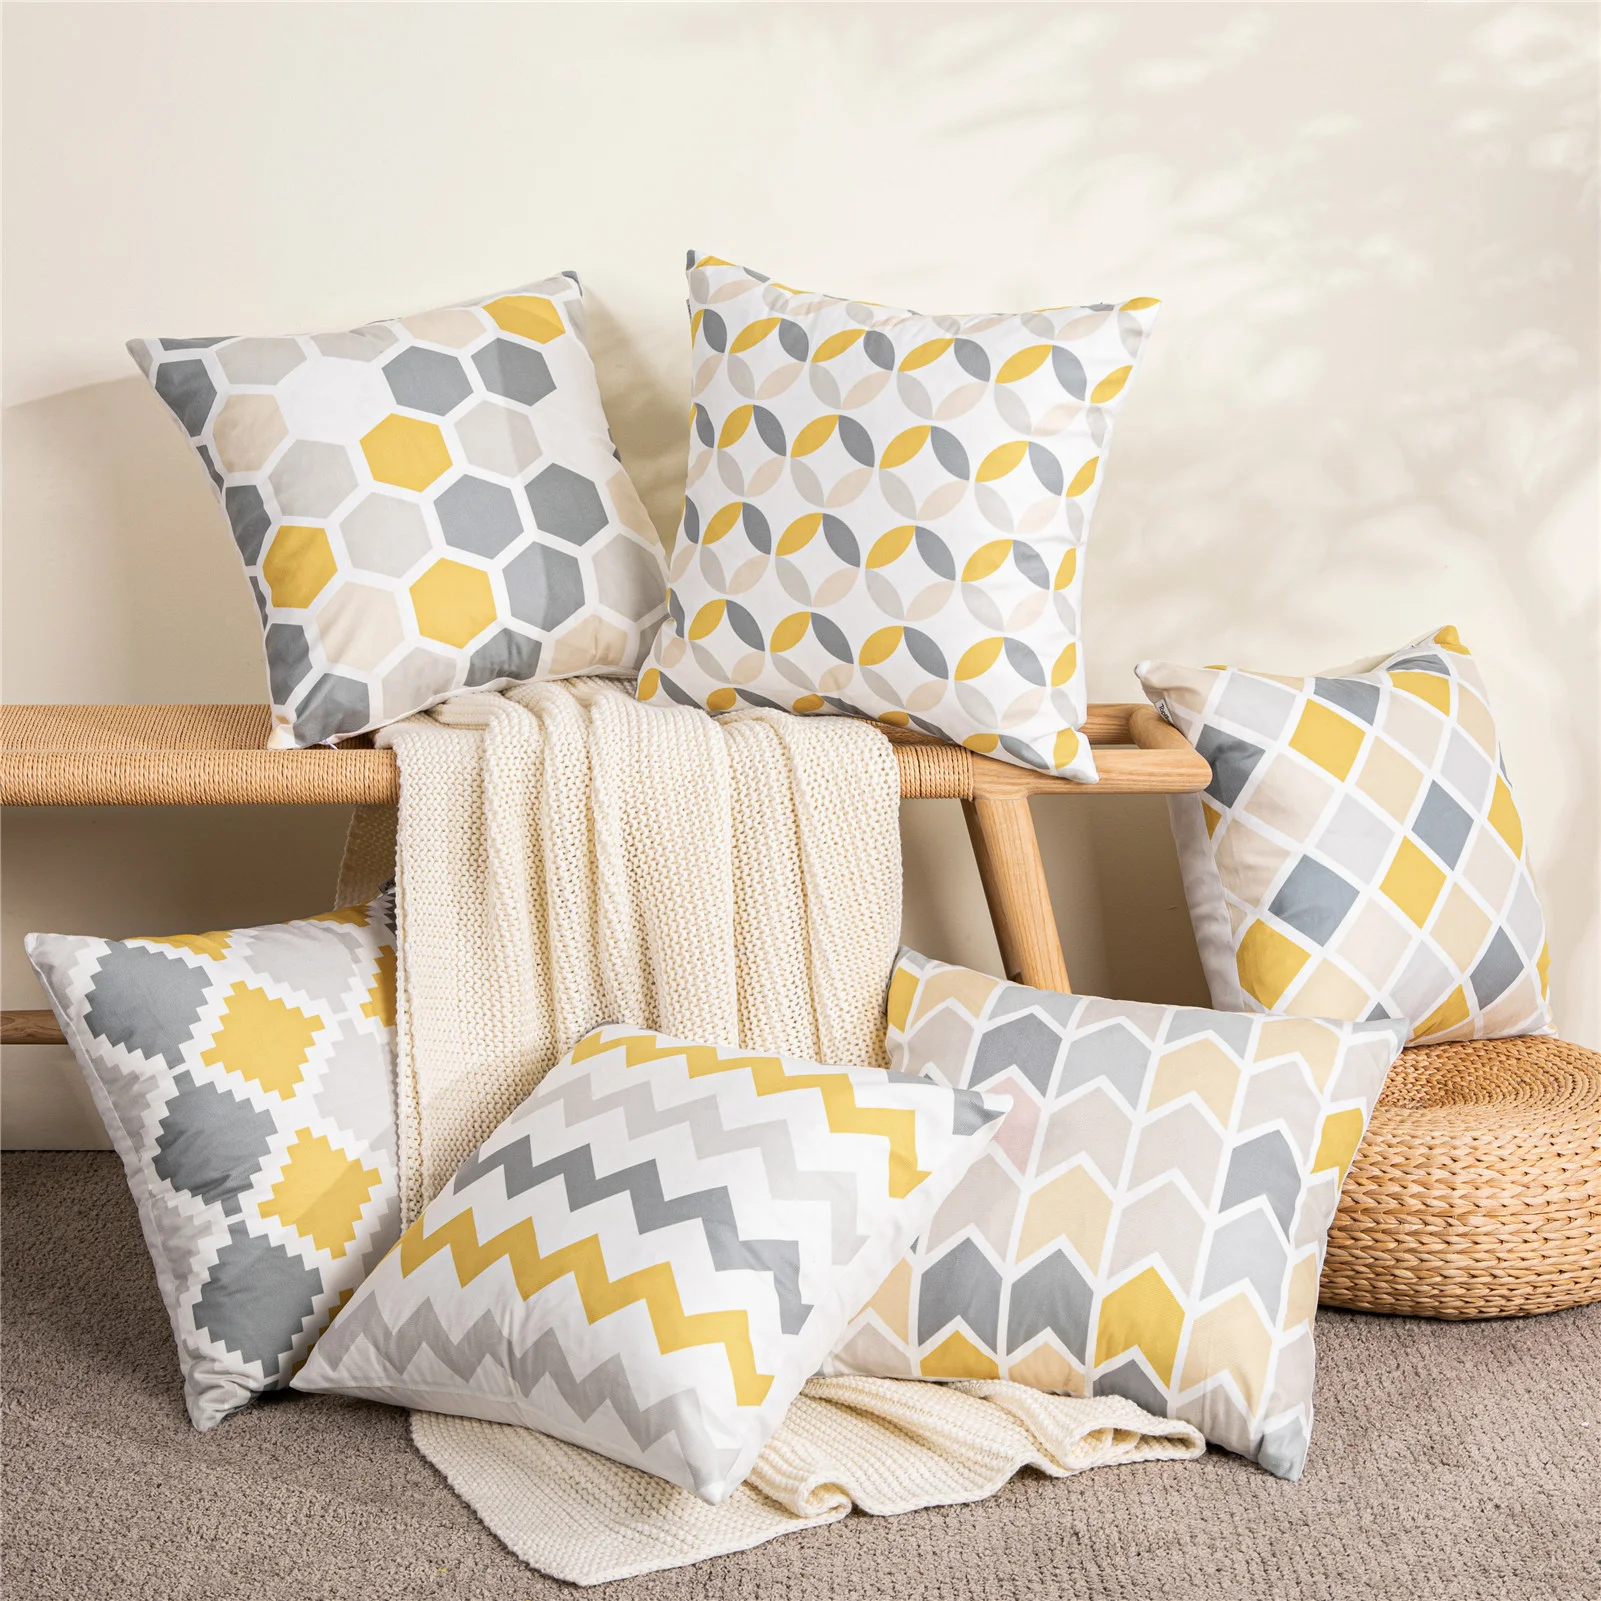 Geometric Nordic Cushion Cover Gray And Yellow Microfiber Throw Pillow Cover 